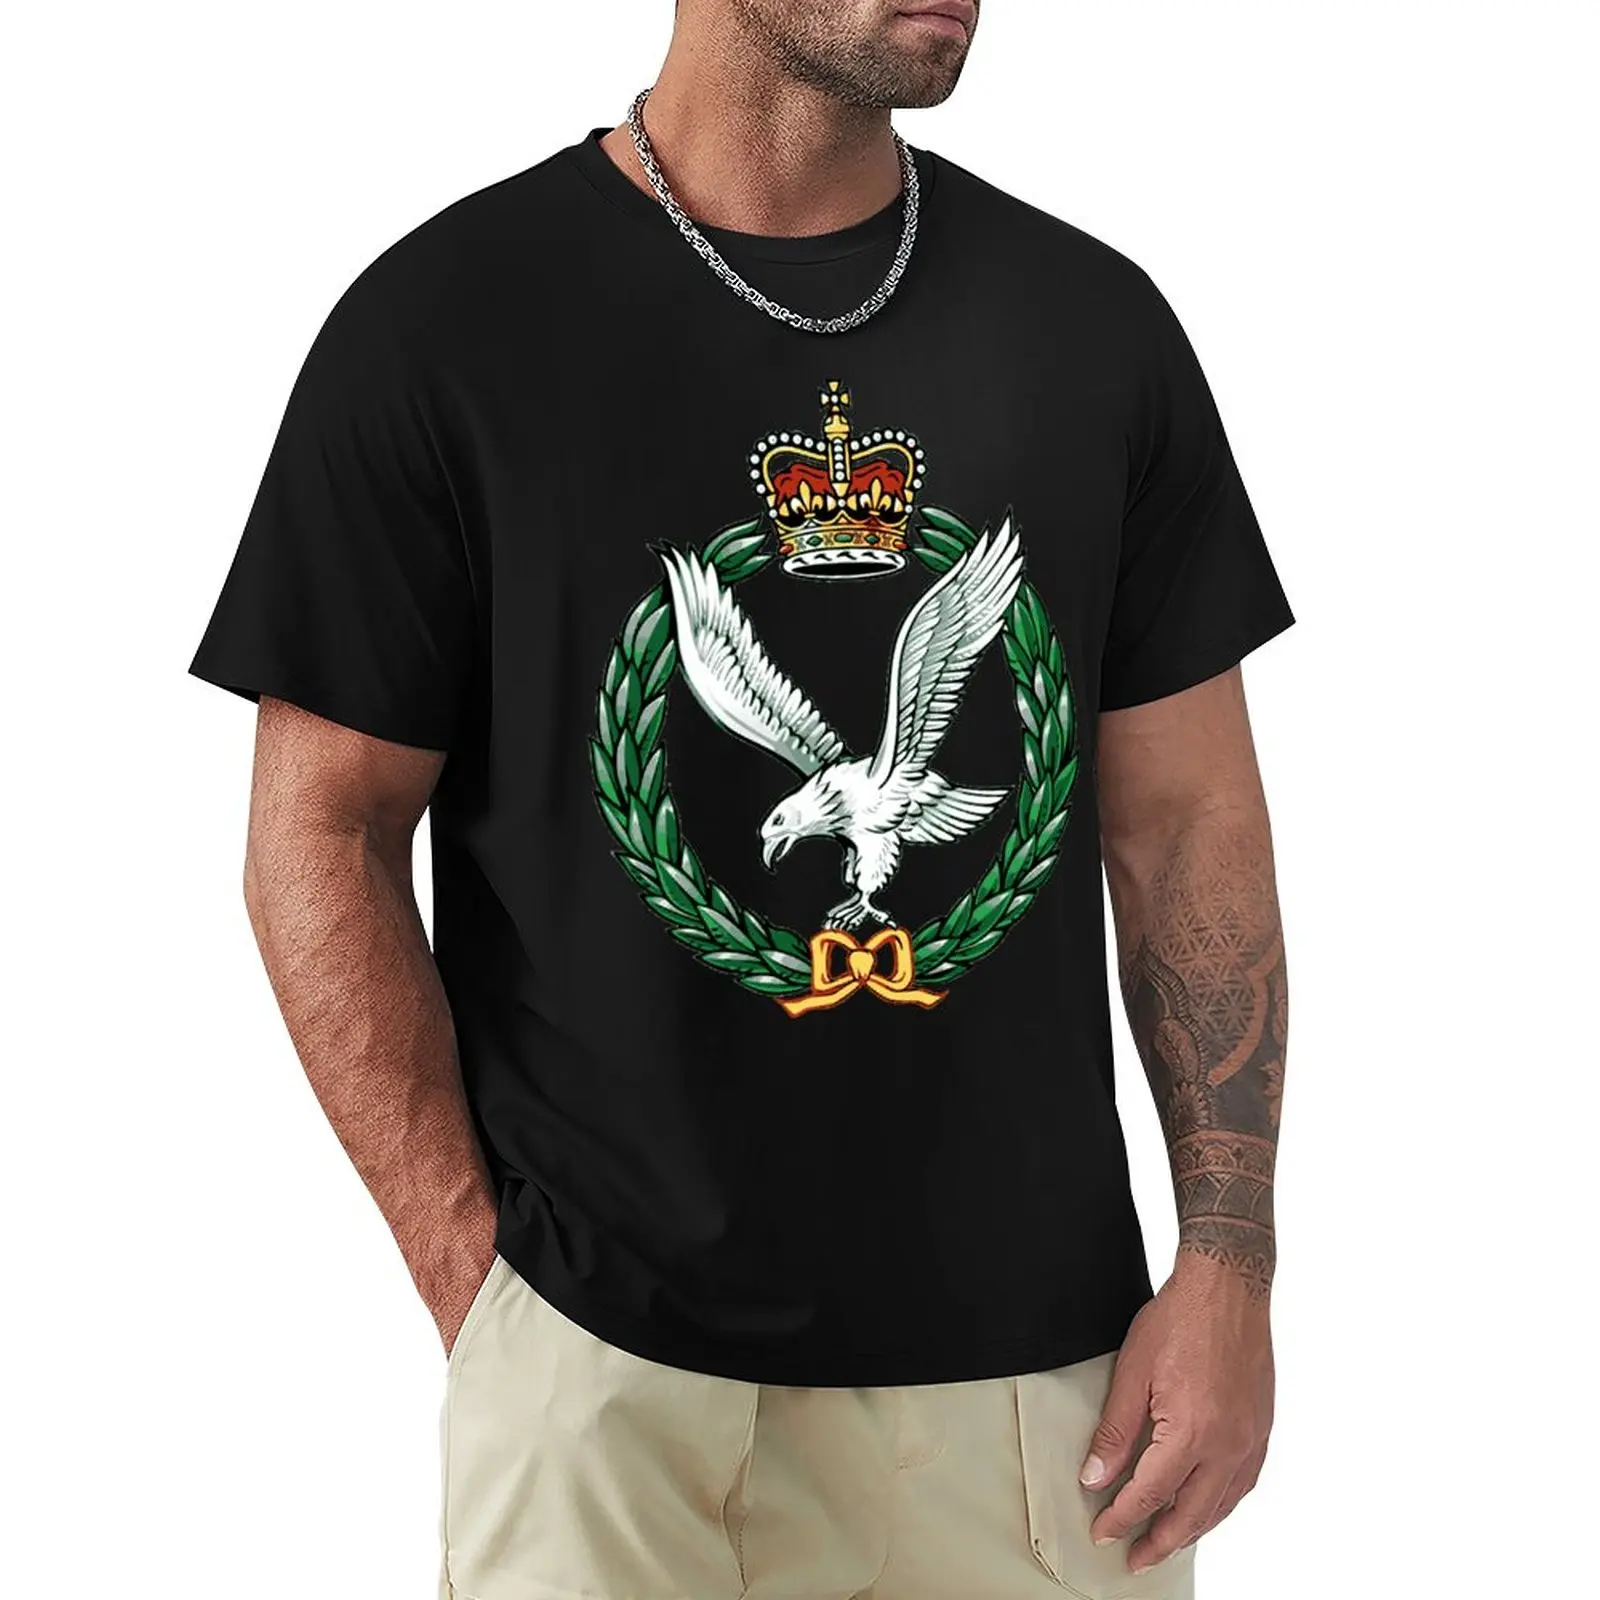 

Army Air Corps (AAC) British Army T-Shirt animal prinfor boys summer top Men's t-shirts